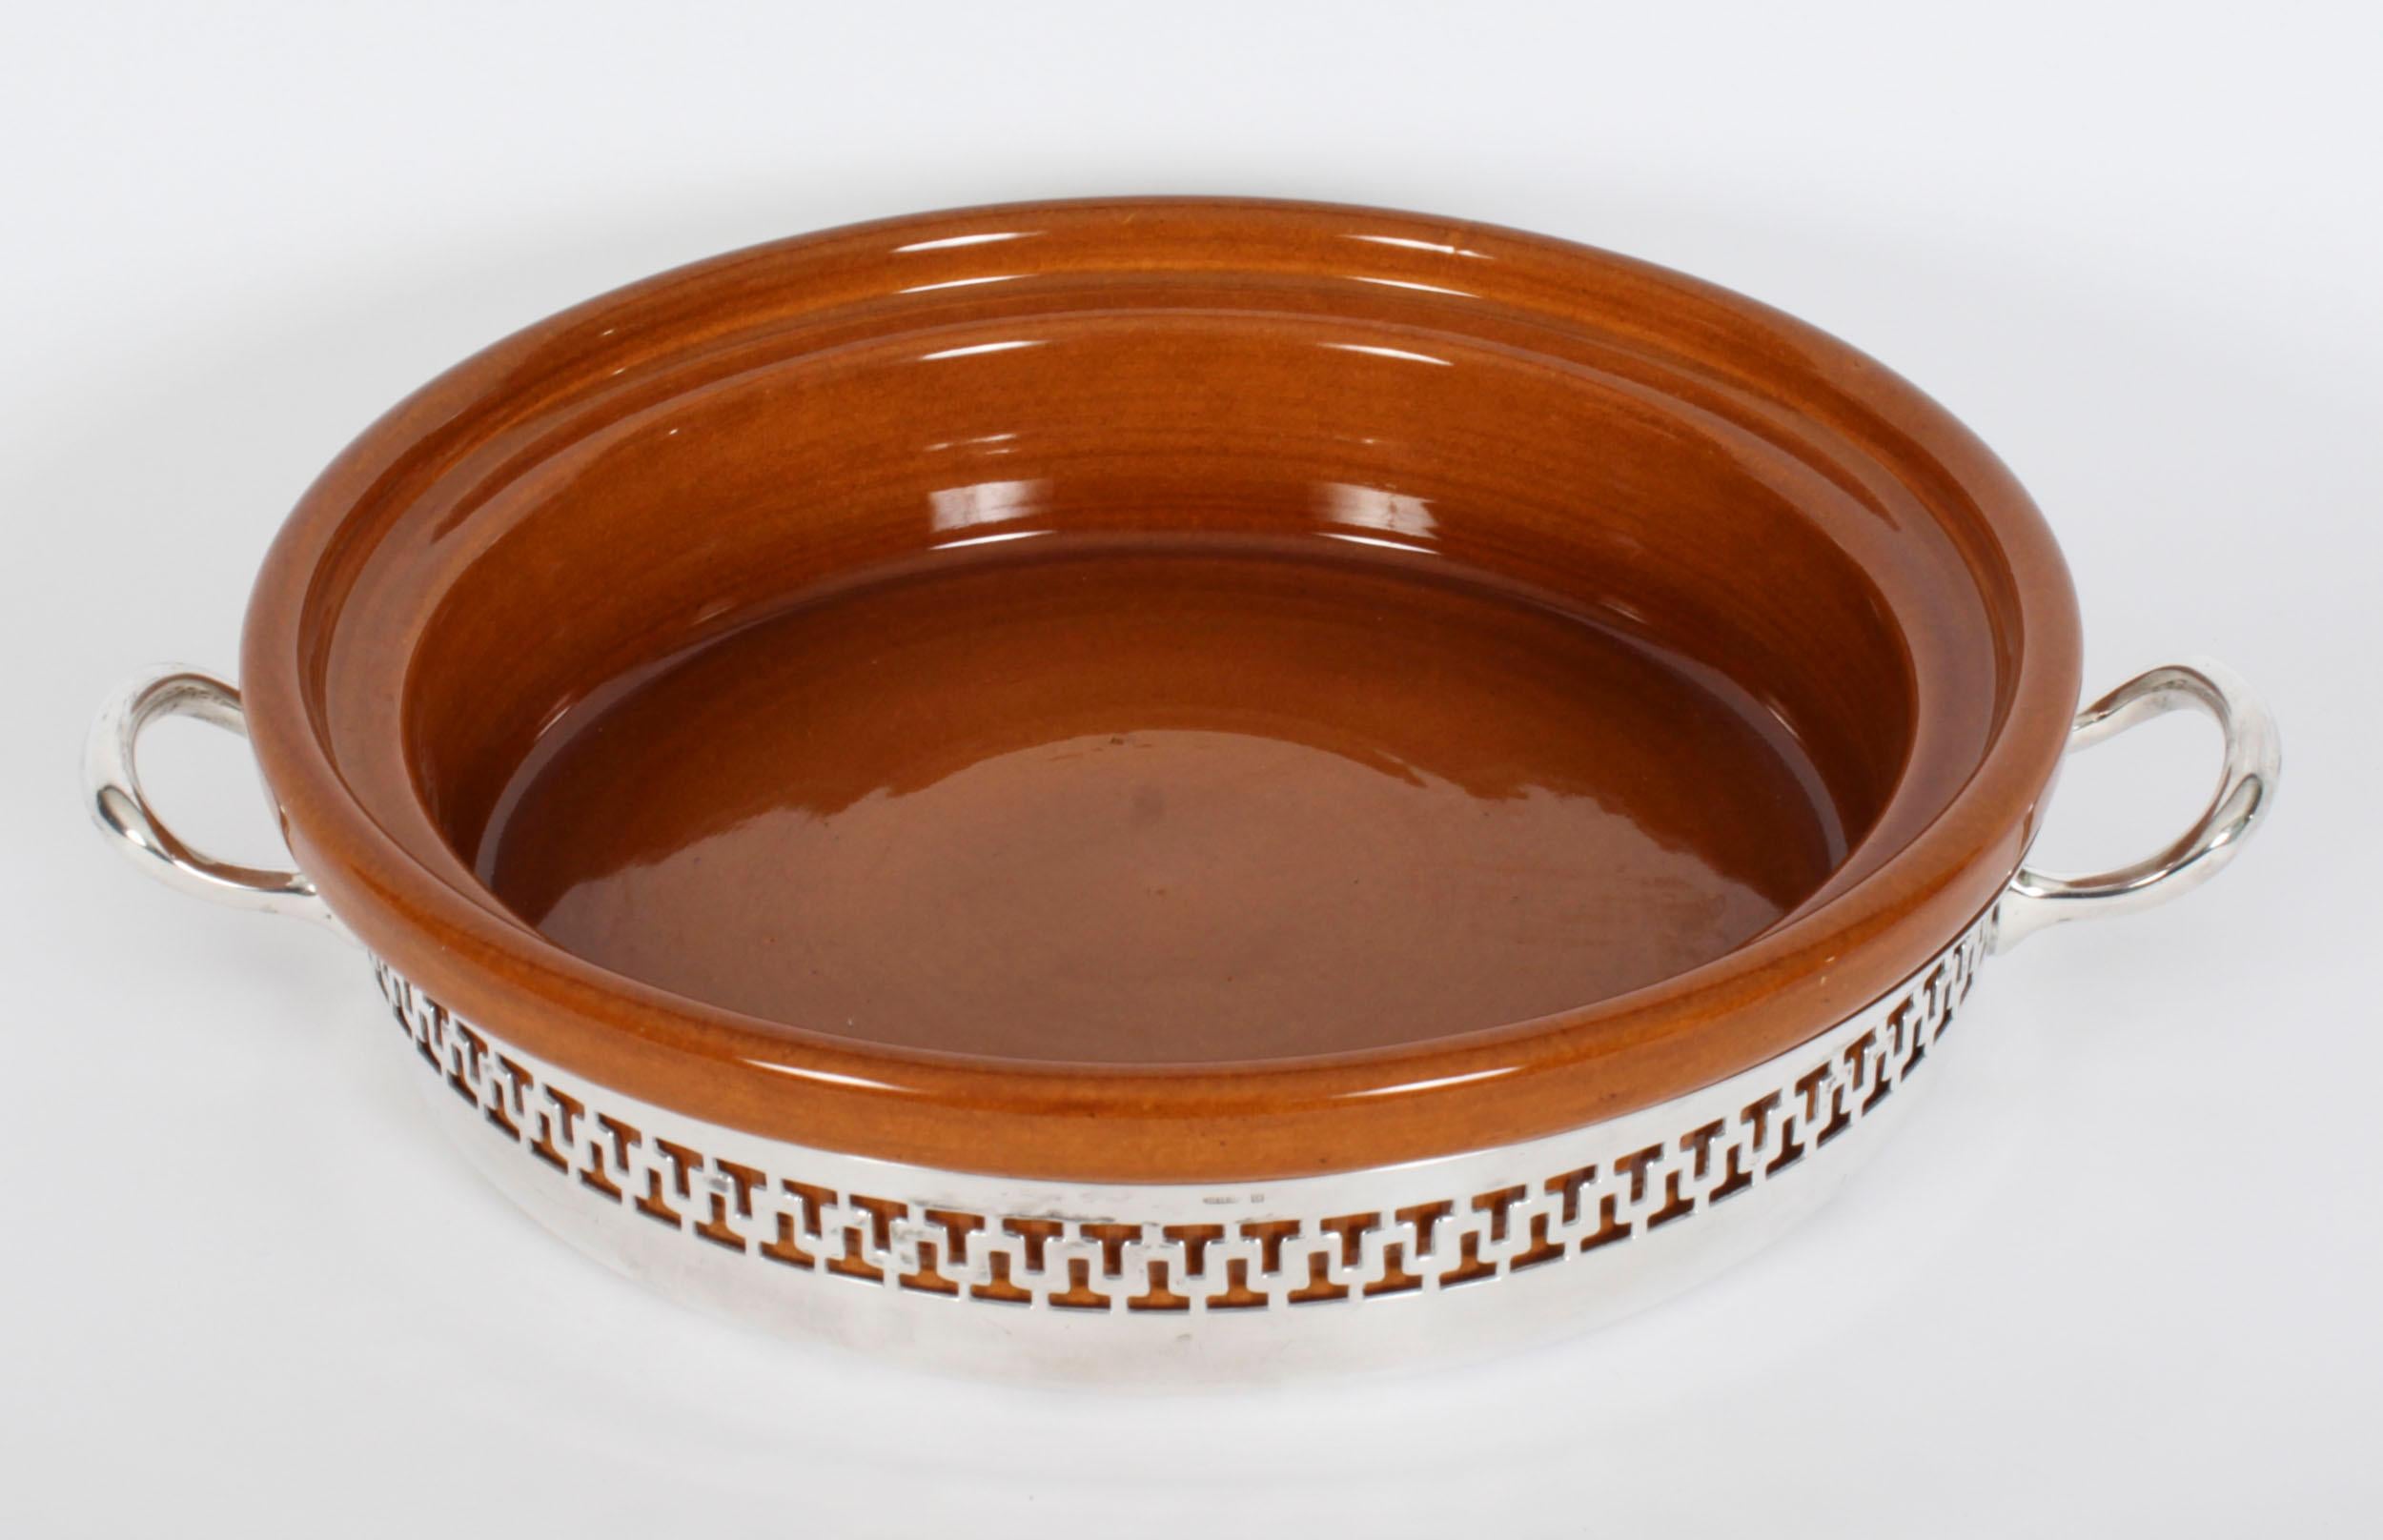 A decorative antique silver plate and terracotta casserole serving dish by Wiskemann, dating from the 1920s.
 
The round serving dish features a twin handled silver plated stand decorated with a pierced fretwork gallery.
 
Otto-Leonard Wiskemann